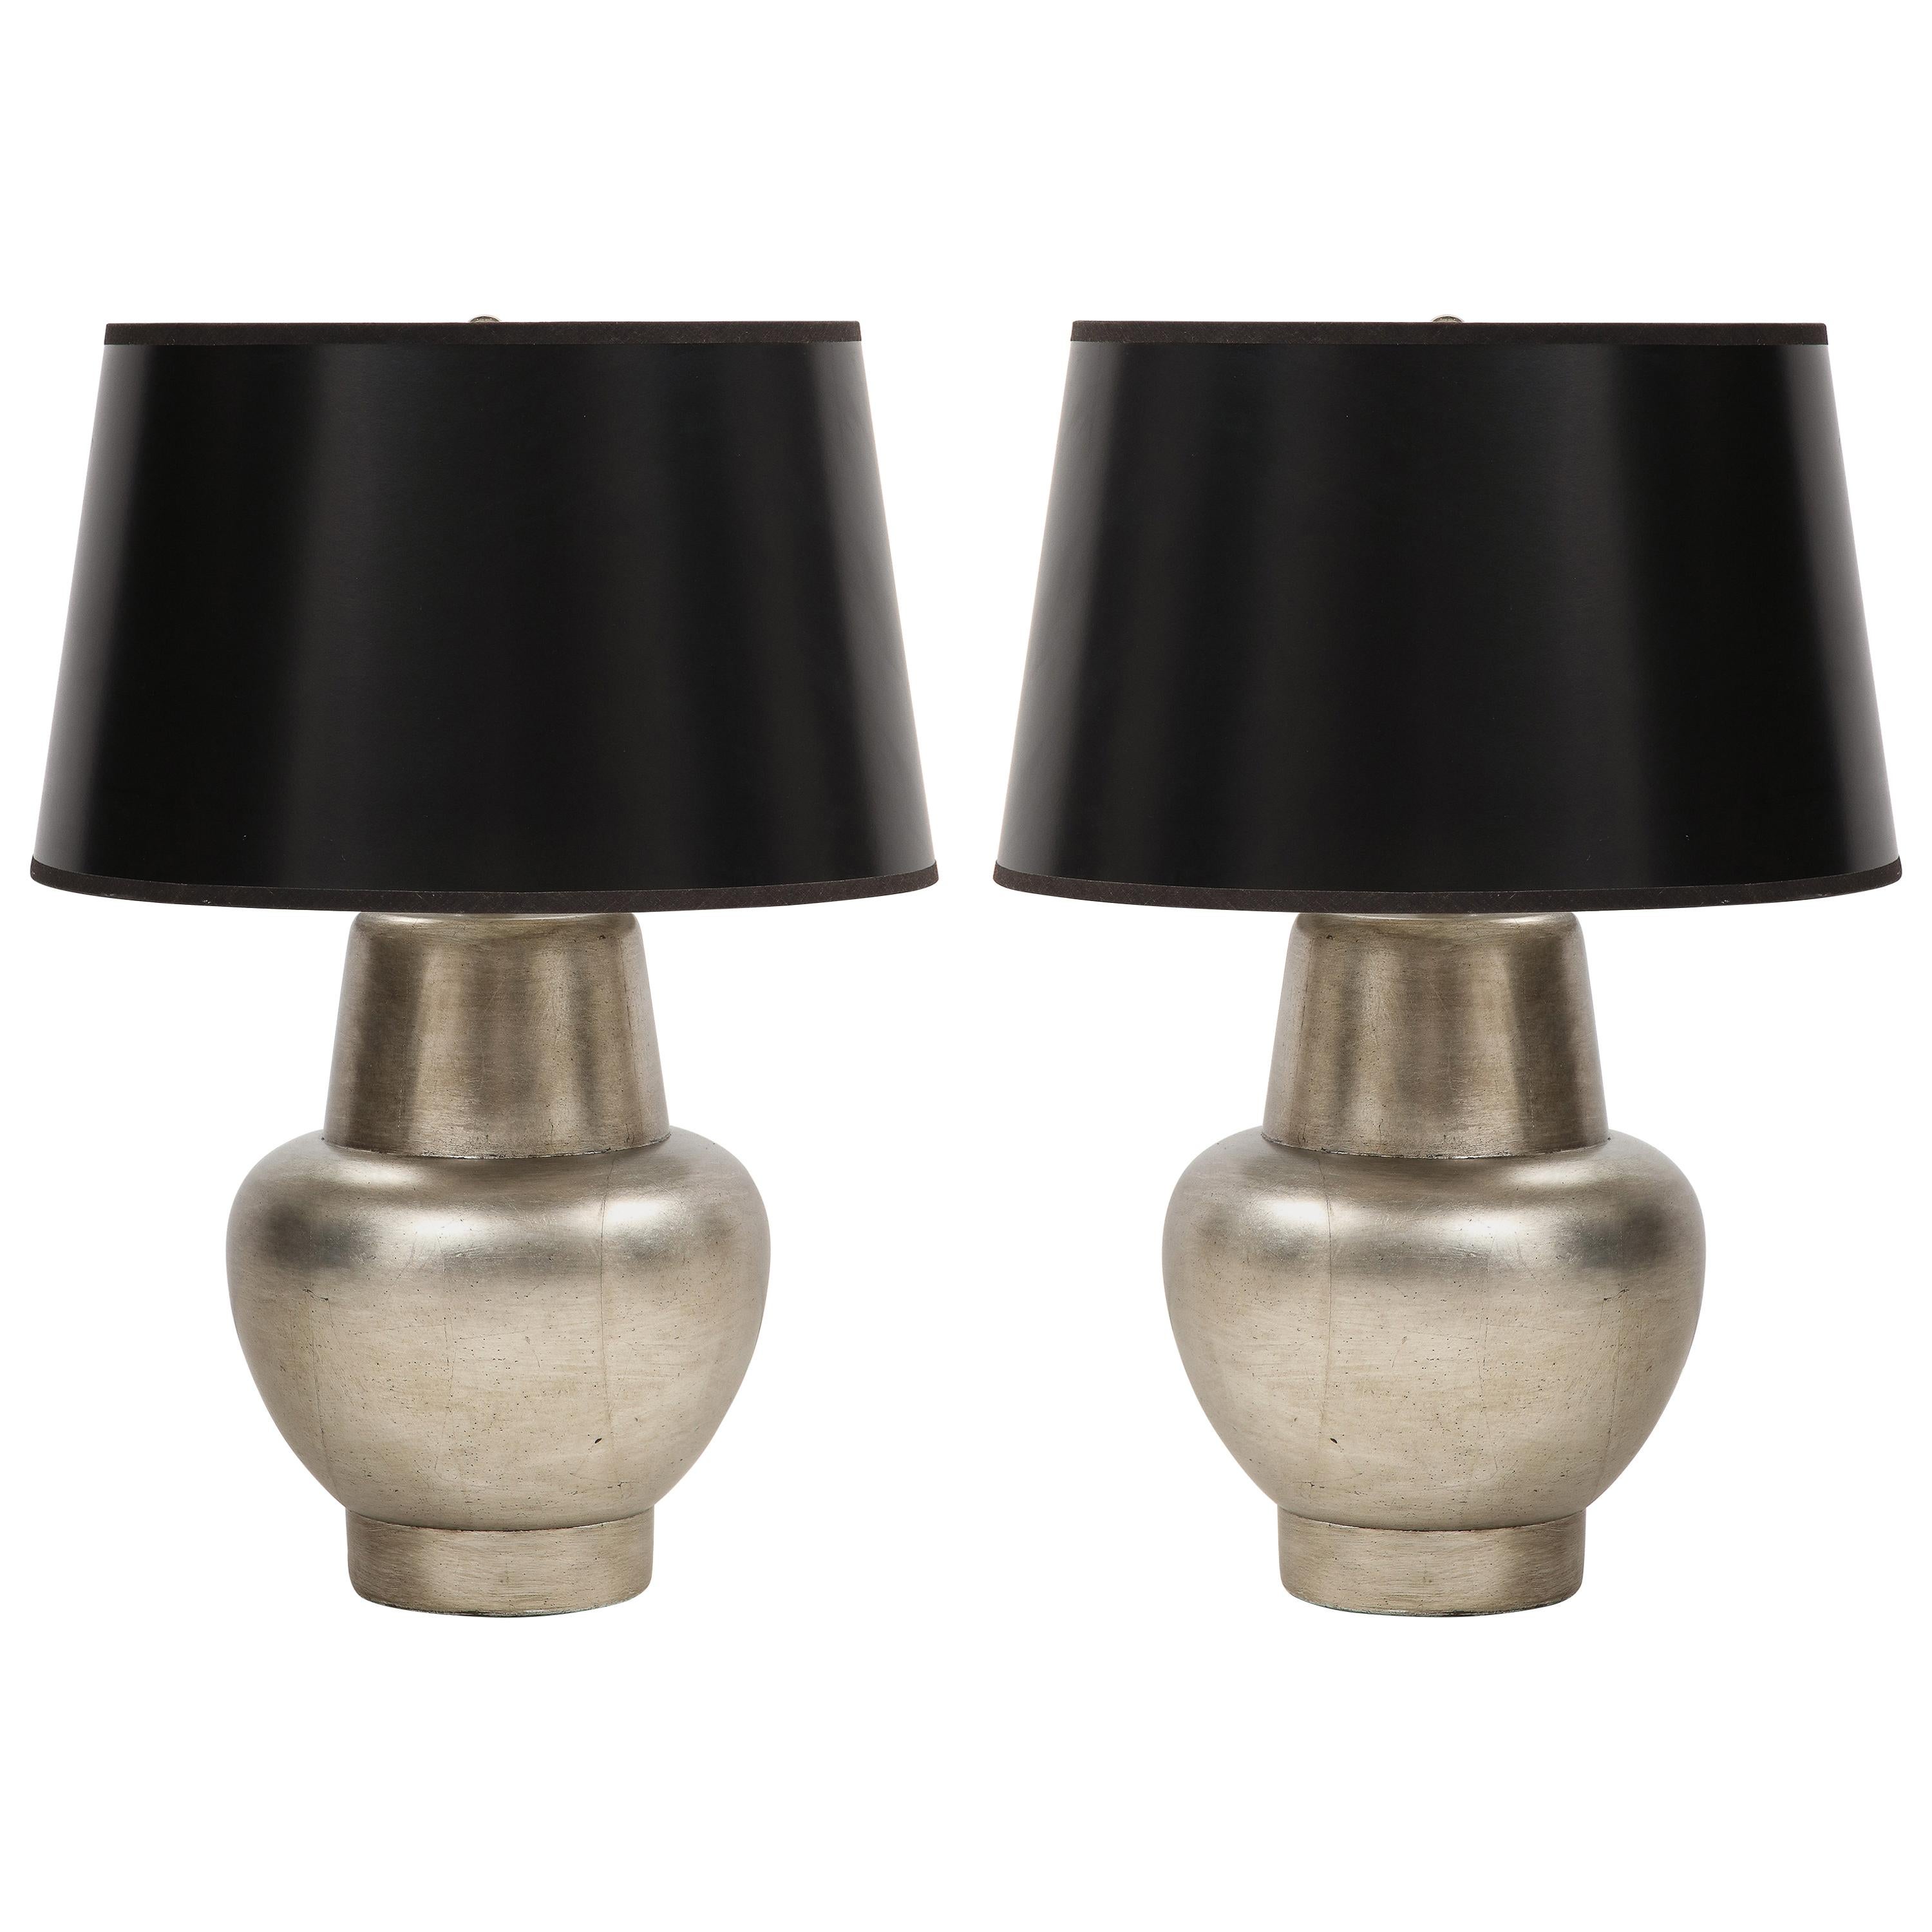 Pair of James Mont Silver Leafed Lamps